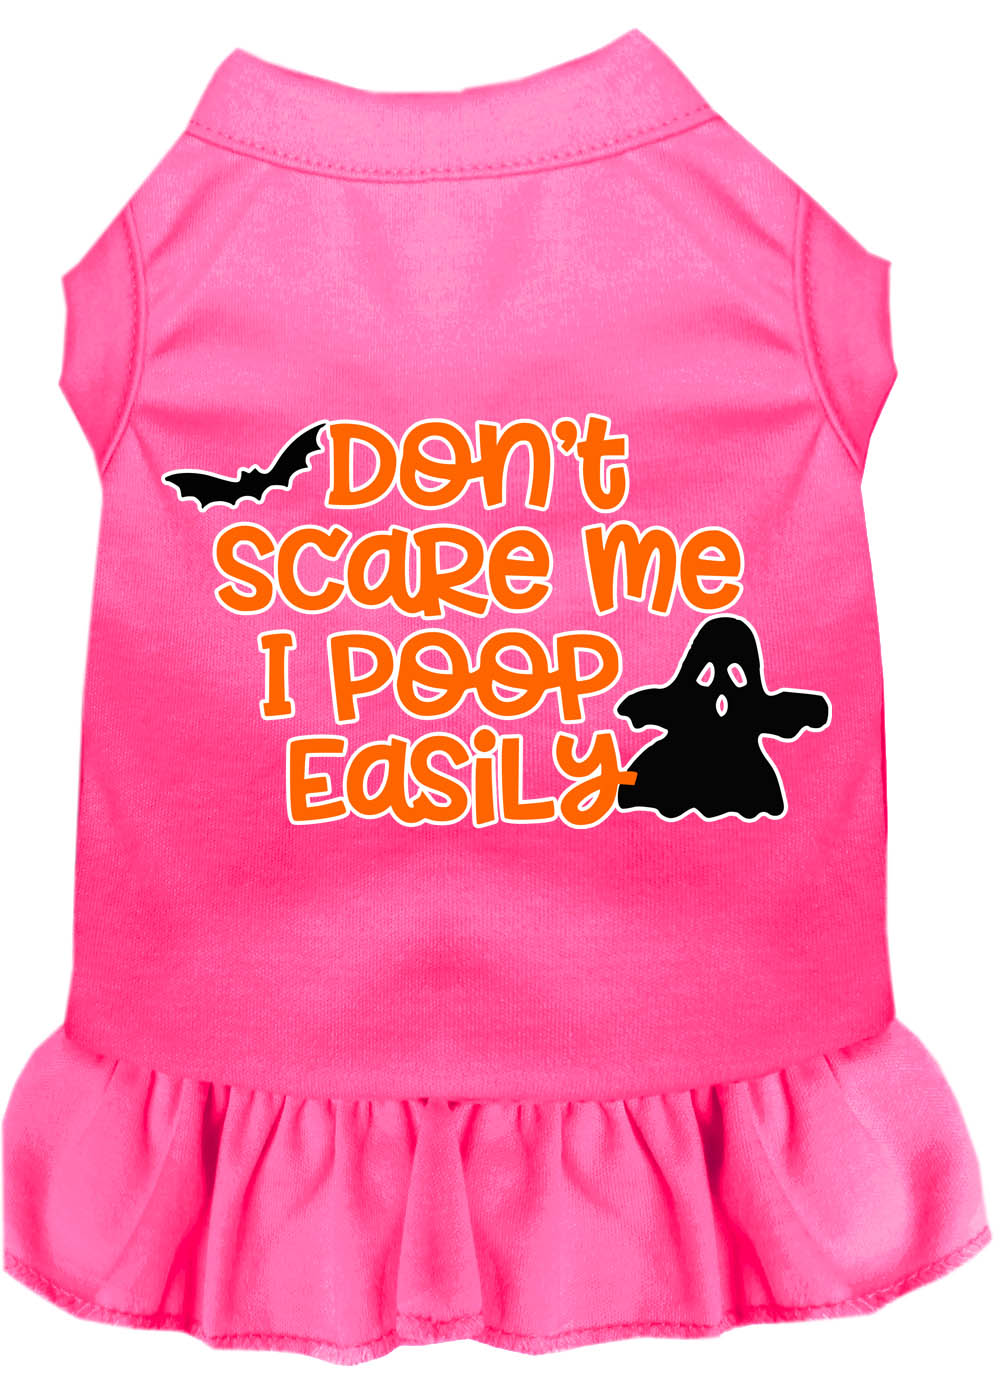 Don't Scare Me, Poops Easily Screen Print Dog Dress Bright Pink 4X